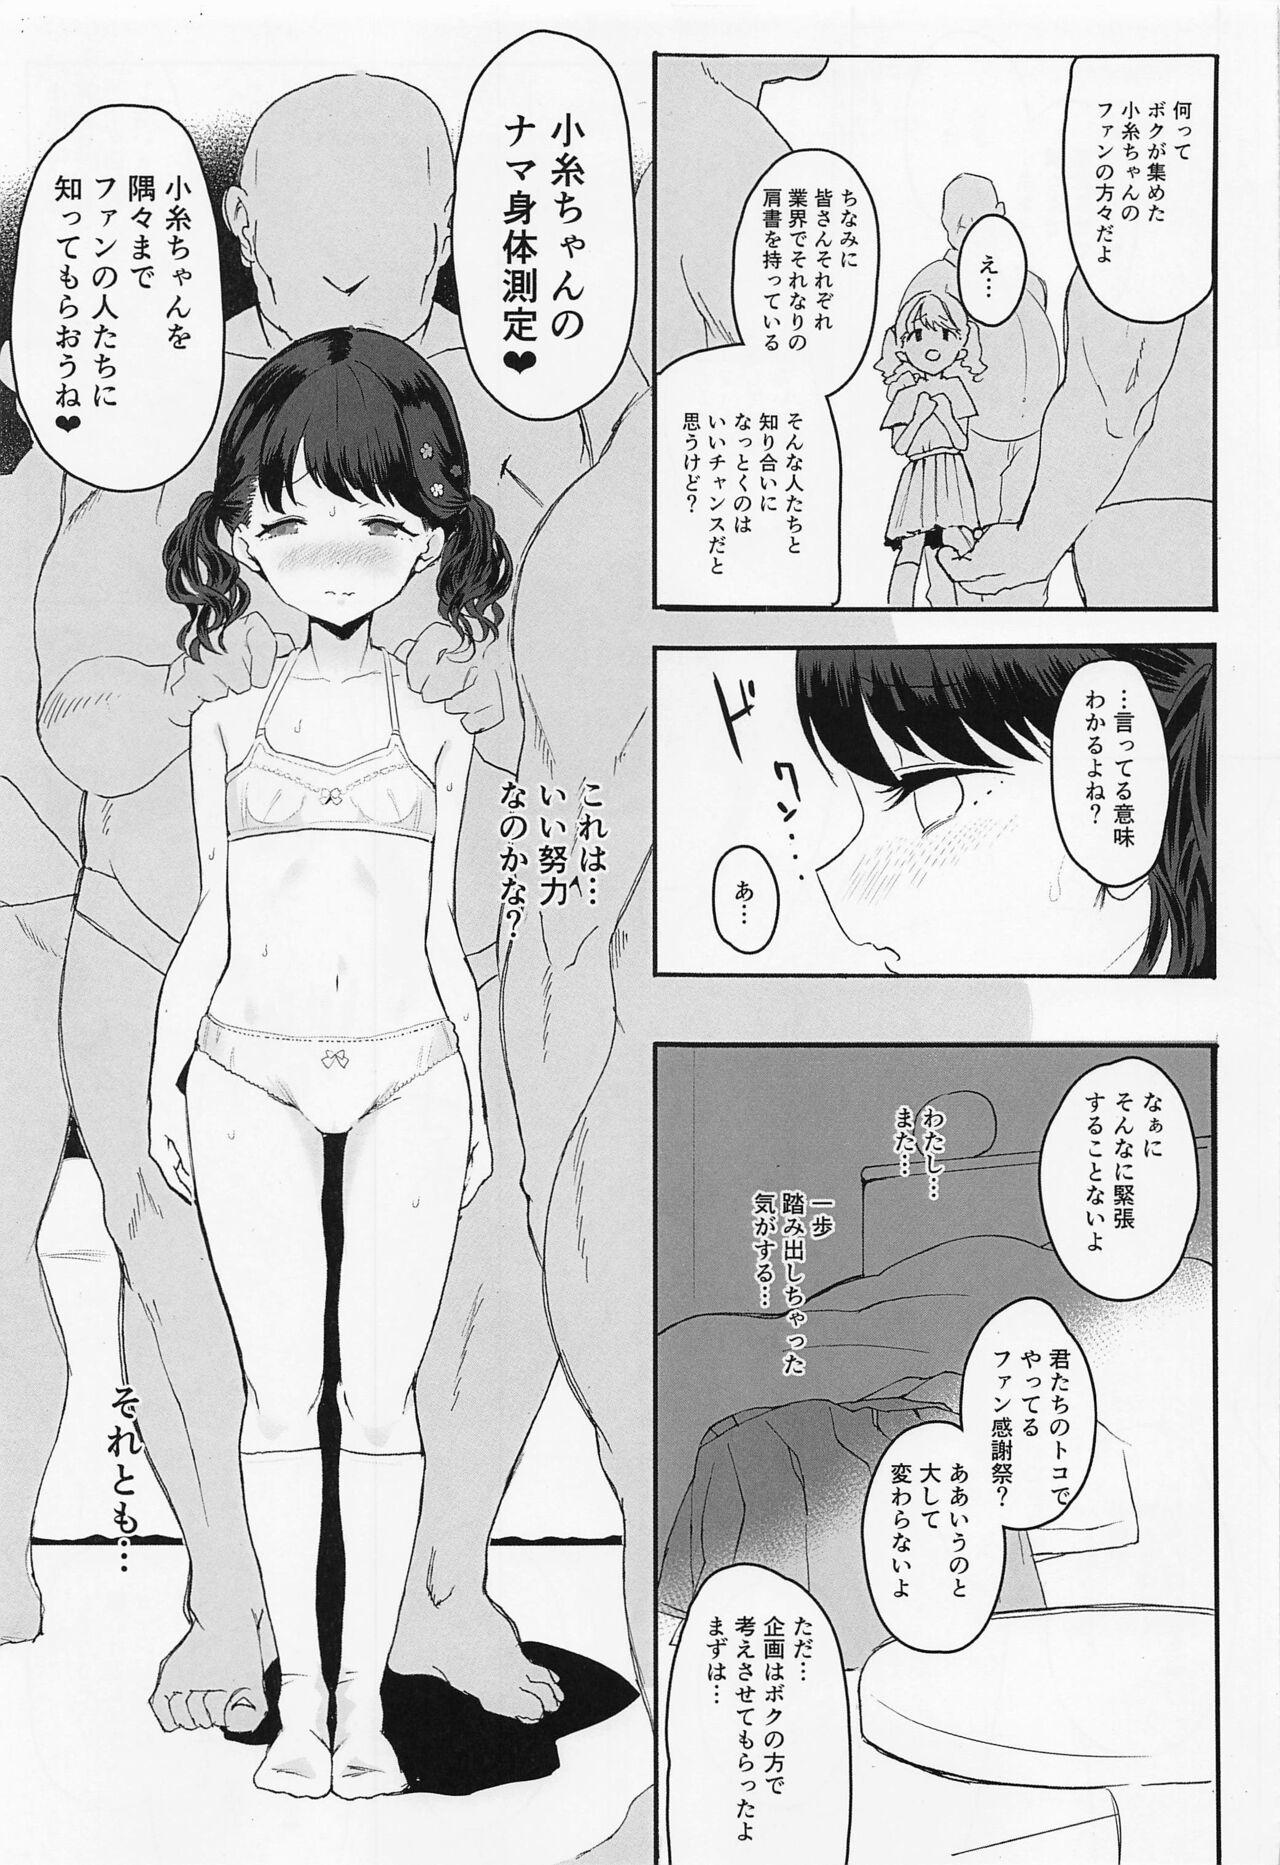 Pounded Majime de Doryokuka datte. 2 - The idolmaster Cum Swallowing - Page 8